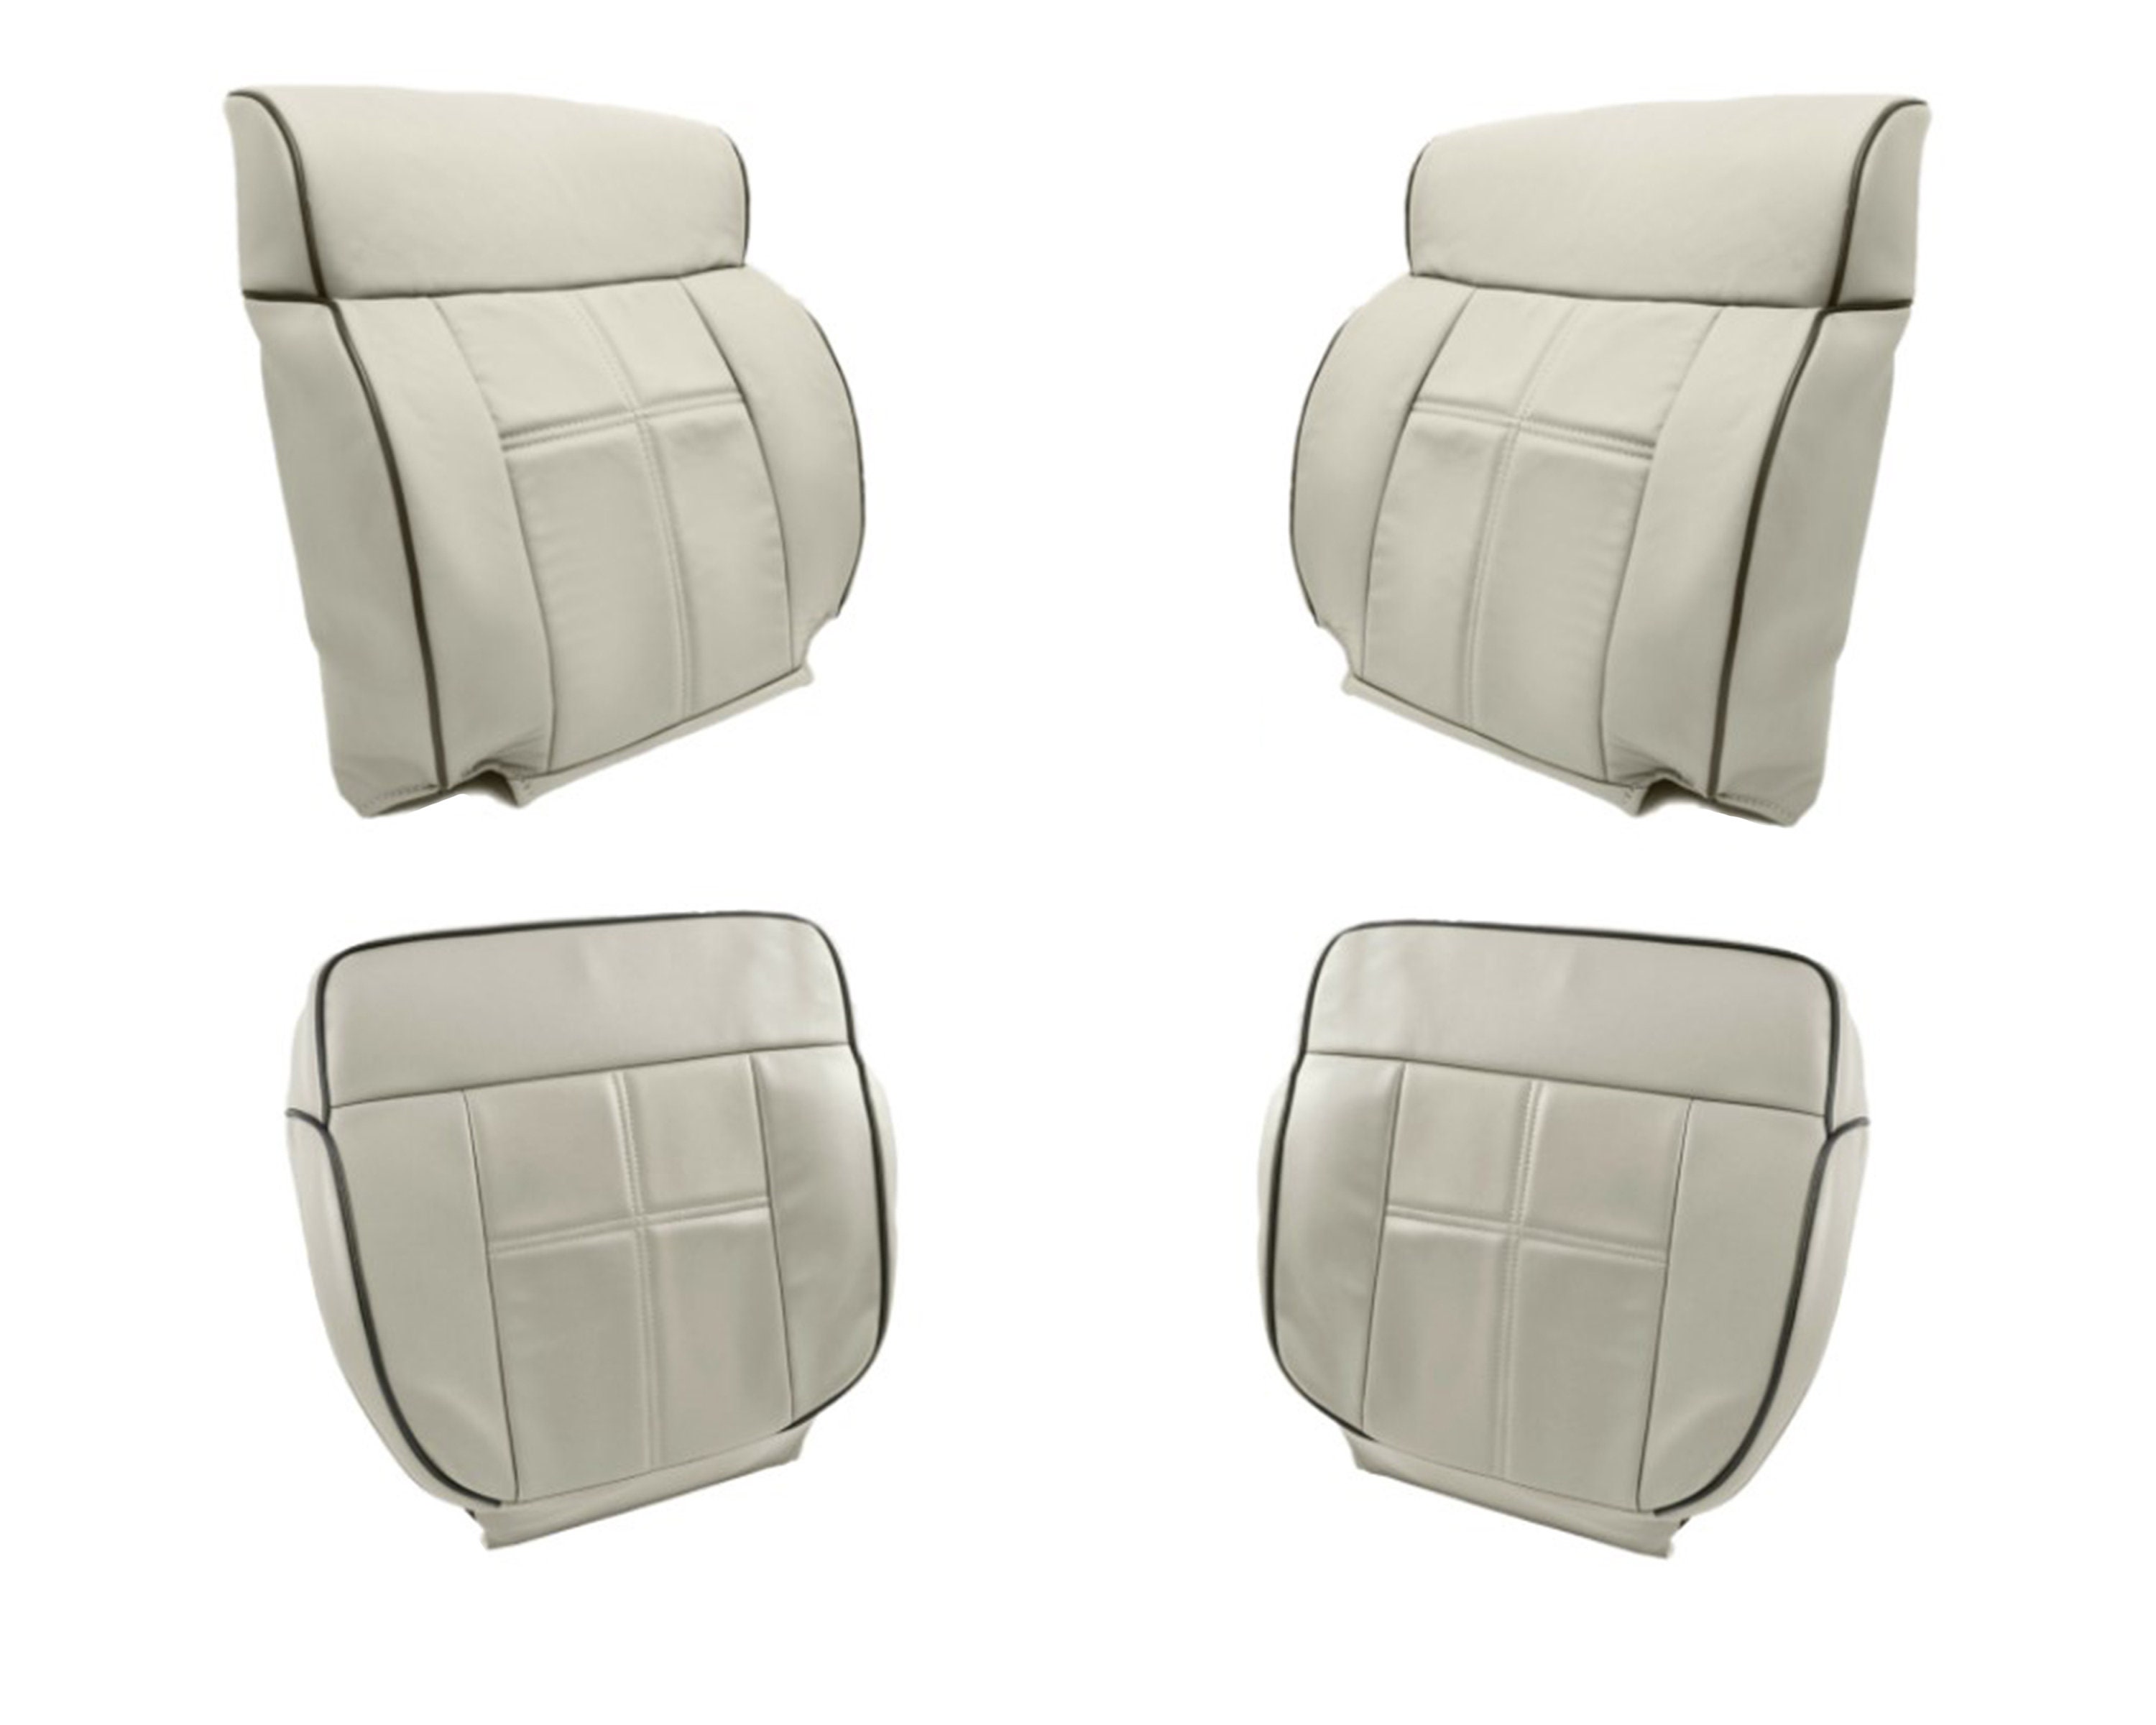 2007-2009 Lincoln MKZ Leather Seat Cover: Passenger Side Complete, Light  Gray Perforated